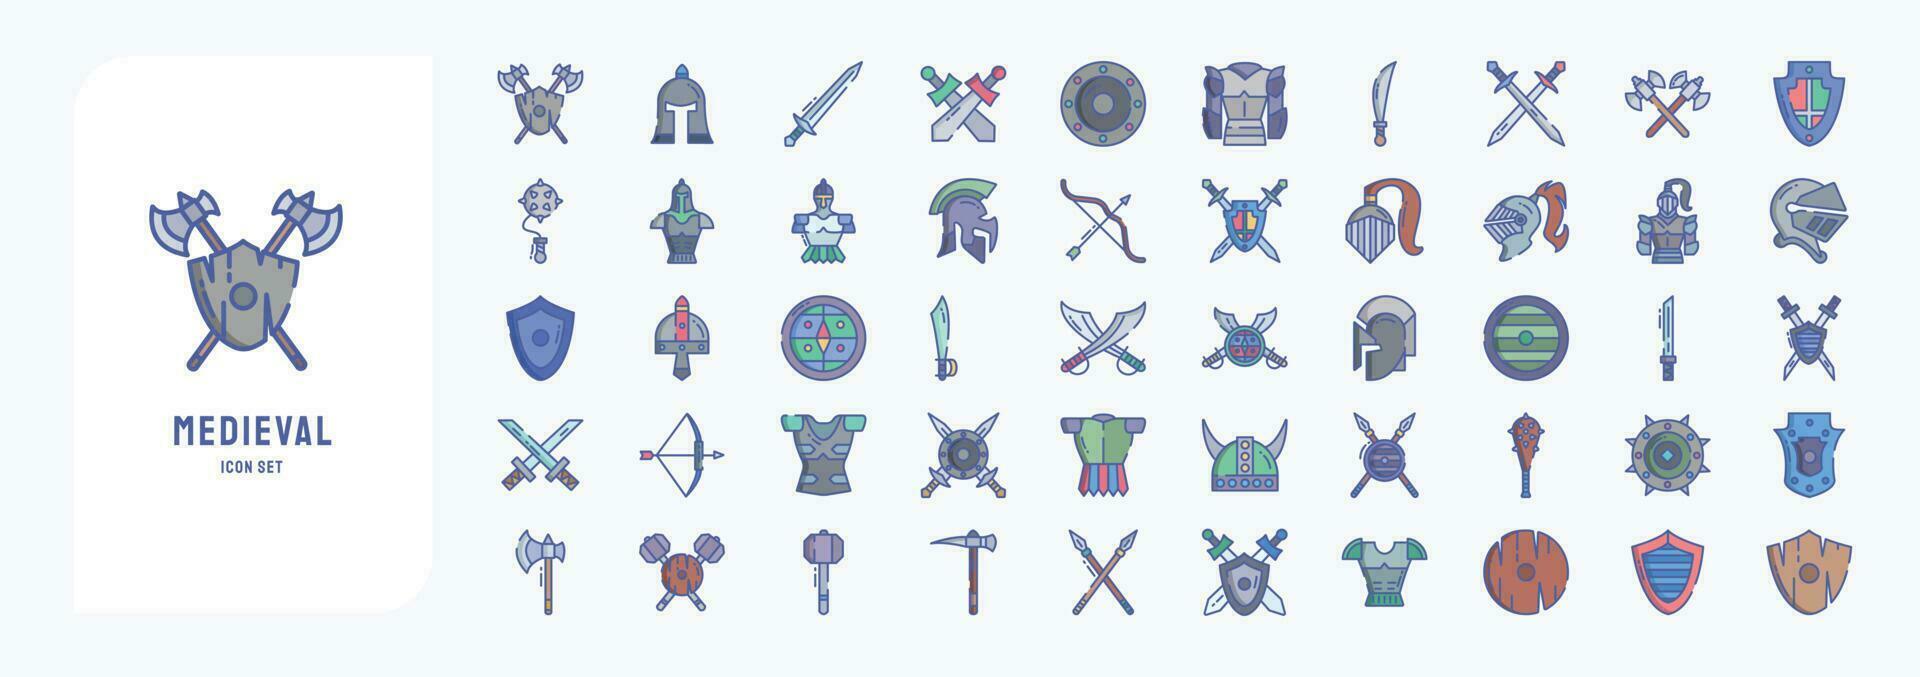 Medieval and kingdoms, including icons like Armor, Roman Helm, War and more vector